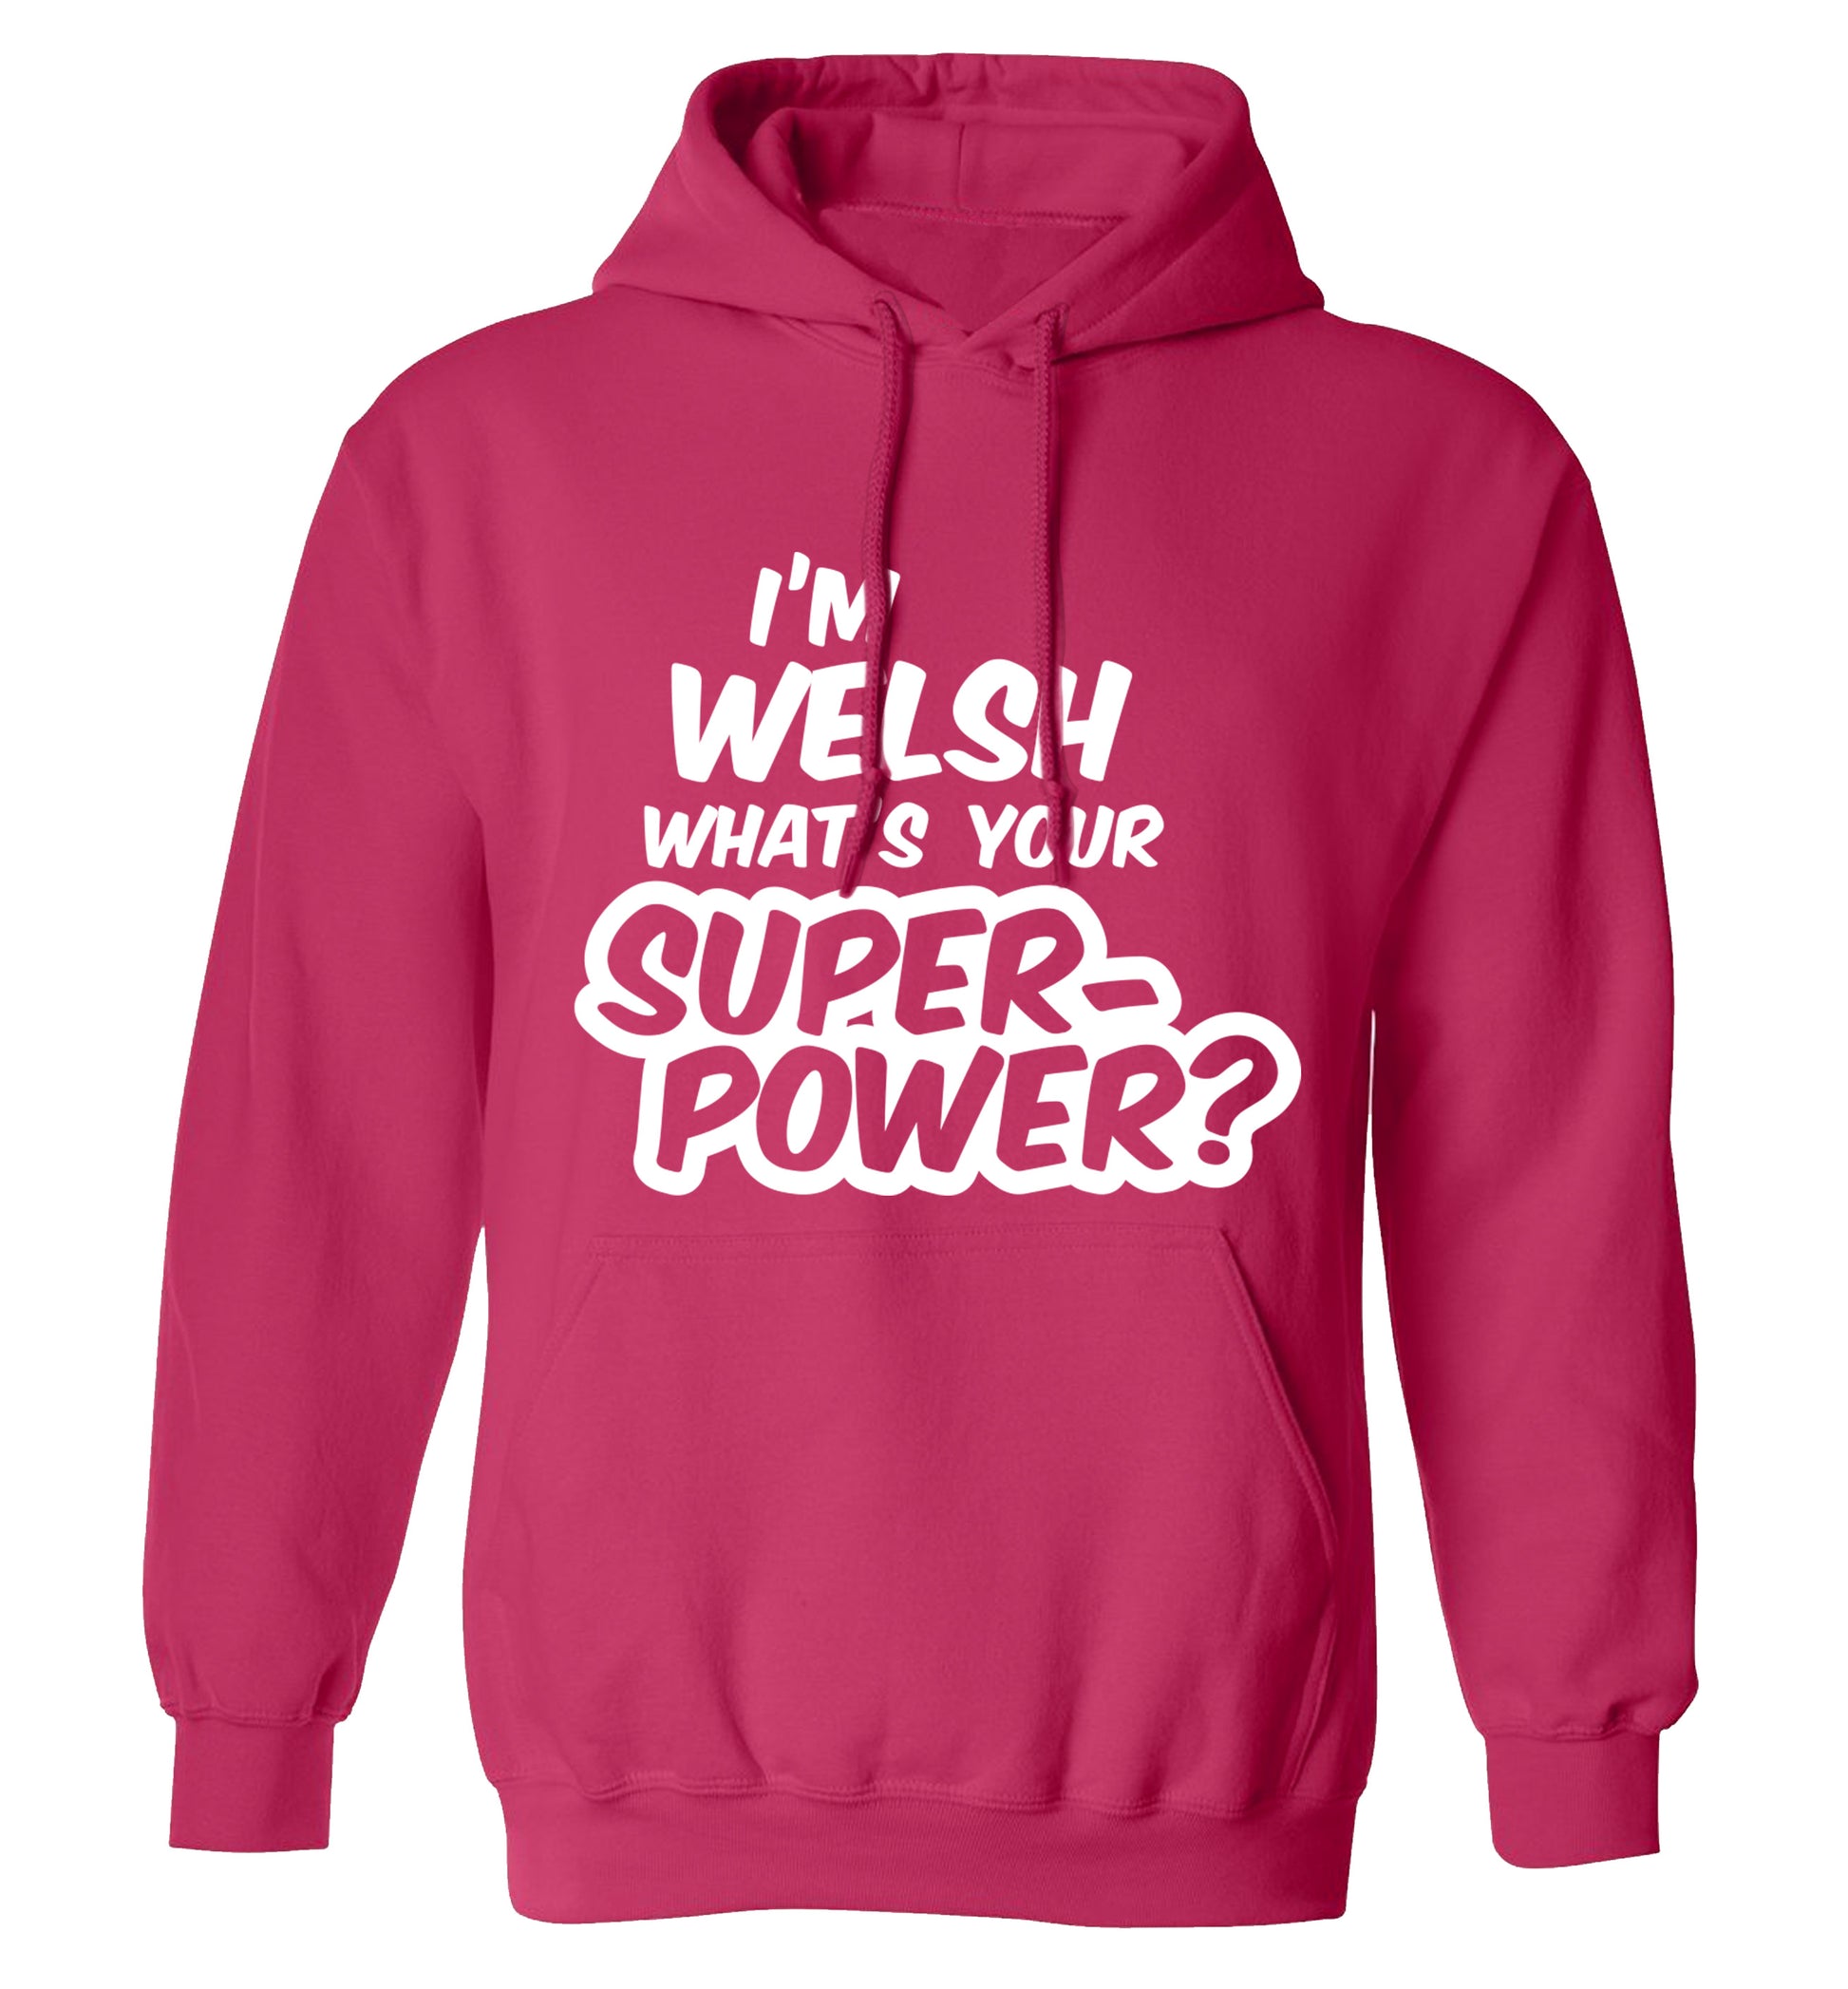 I'm Welsh what's your superpower? adults unisex pink hoodie 2XL